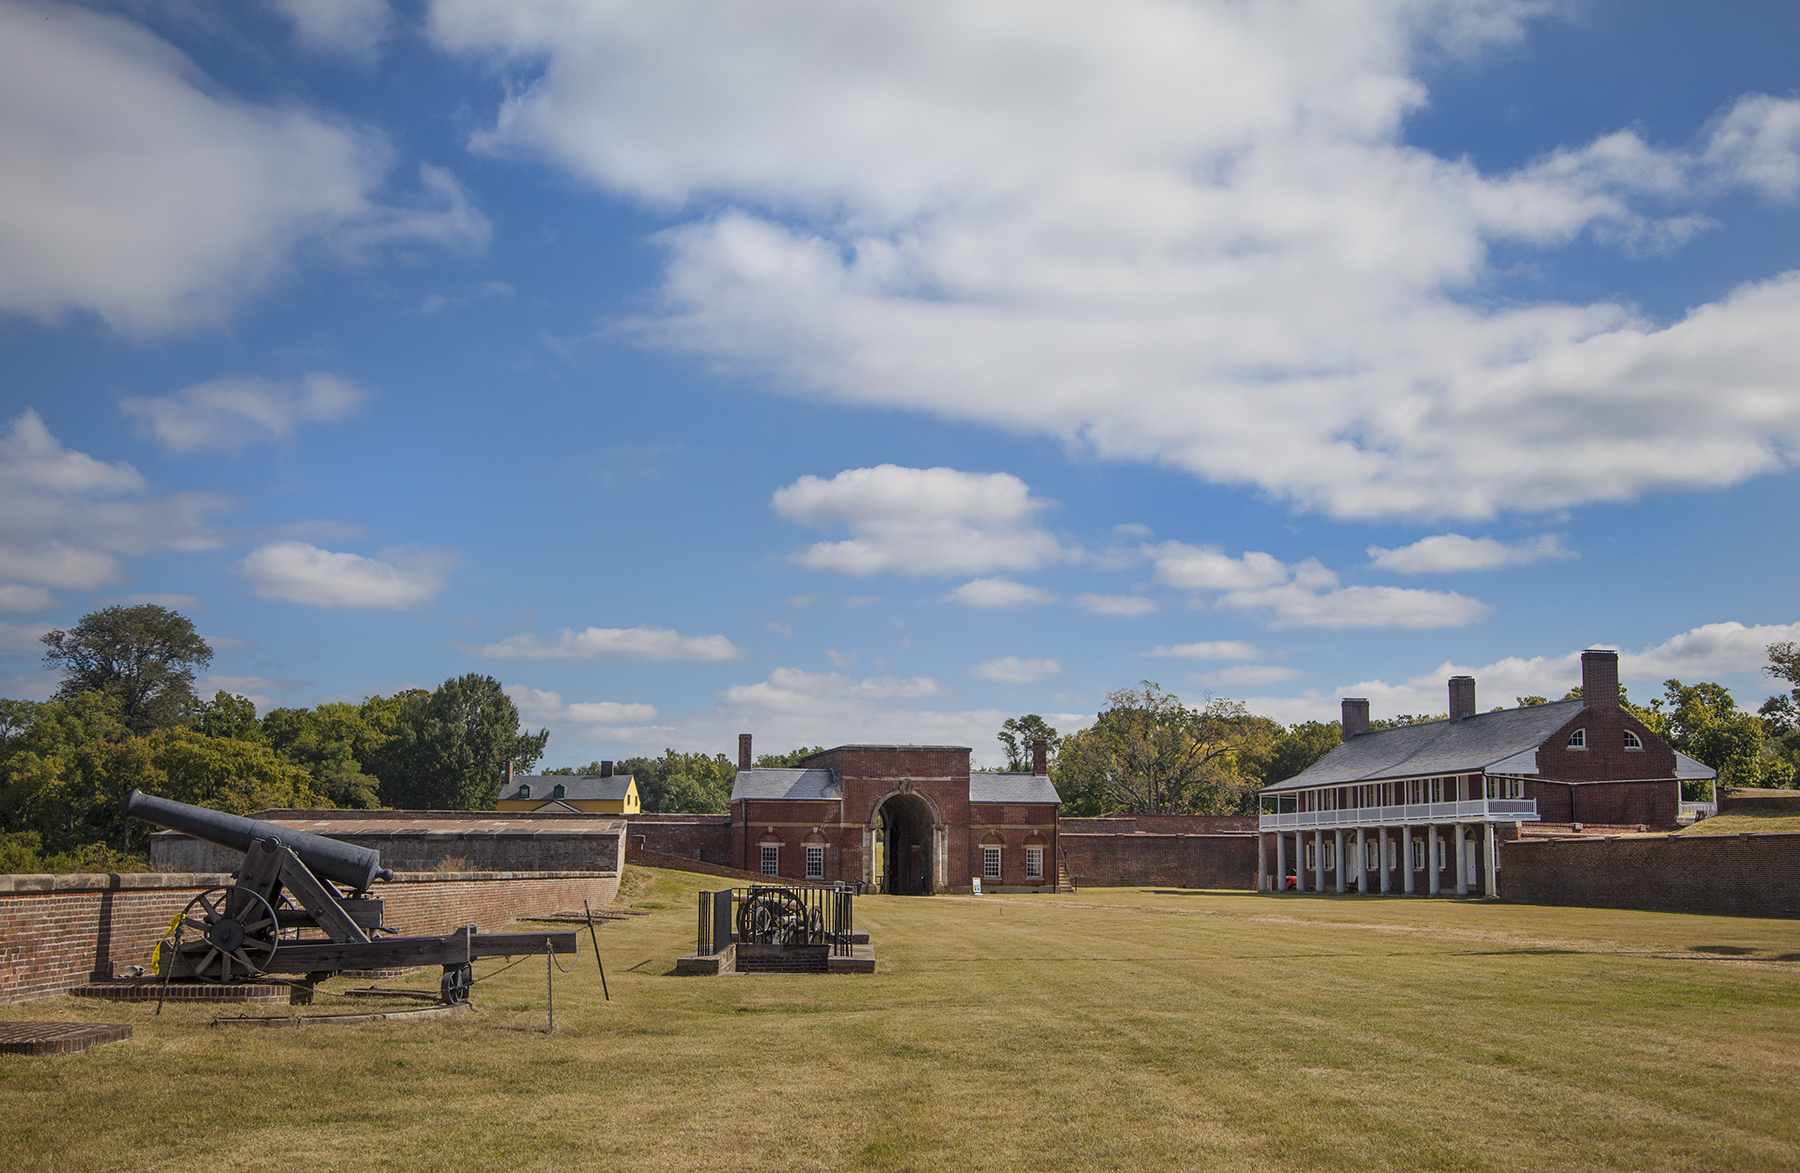 Photo of the parade ground inside the historic fort.